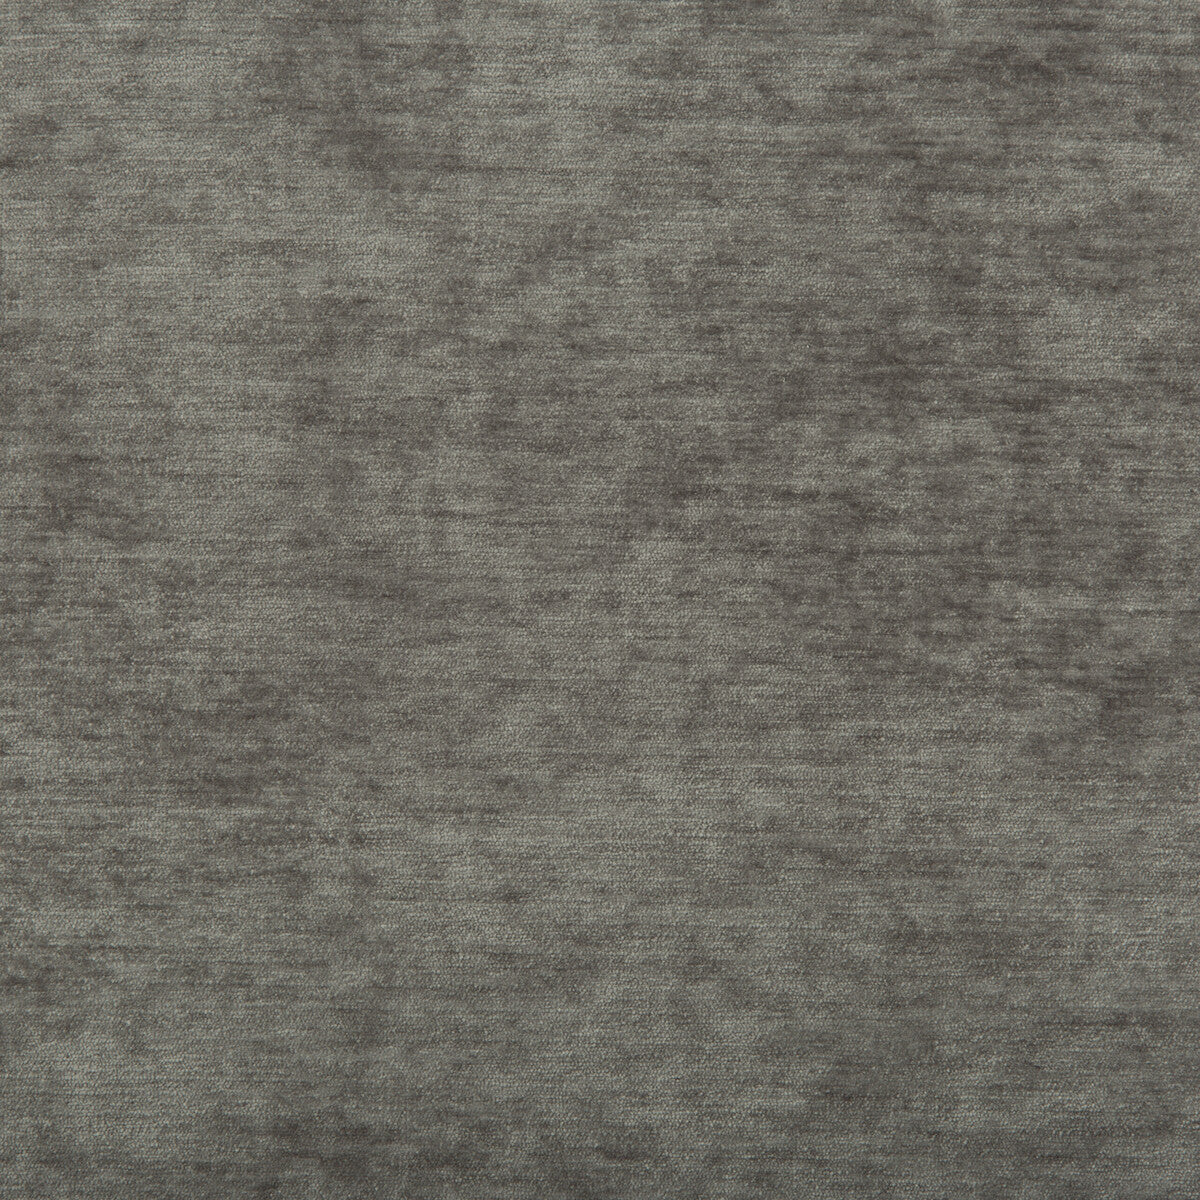 Kravet Contract fabric in 35406-21 color - pattern 35406.21.0 - by Kravet Contract in the Crypton Incase collection